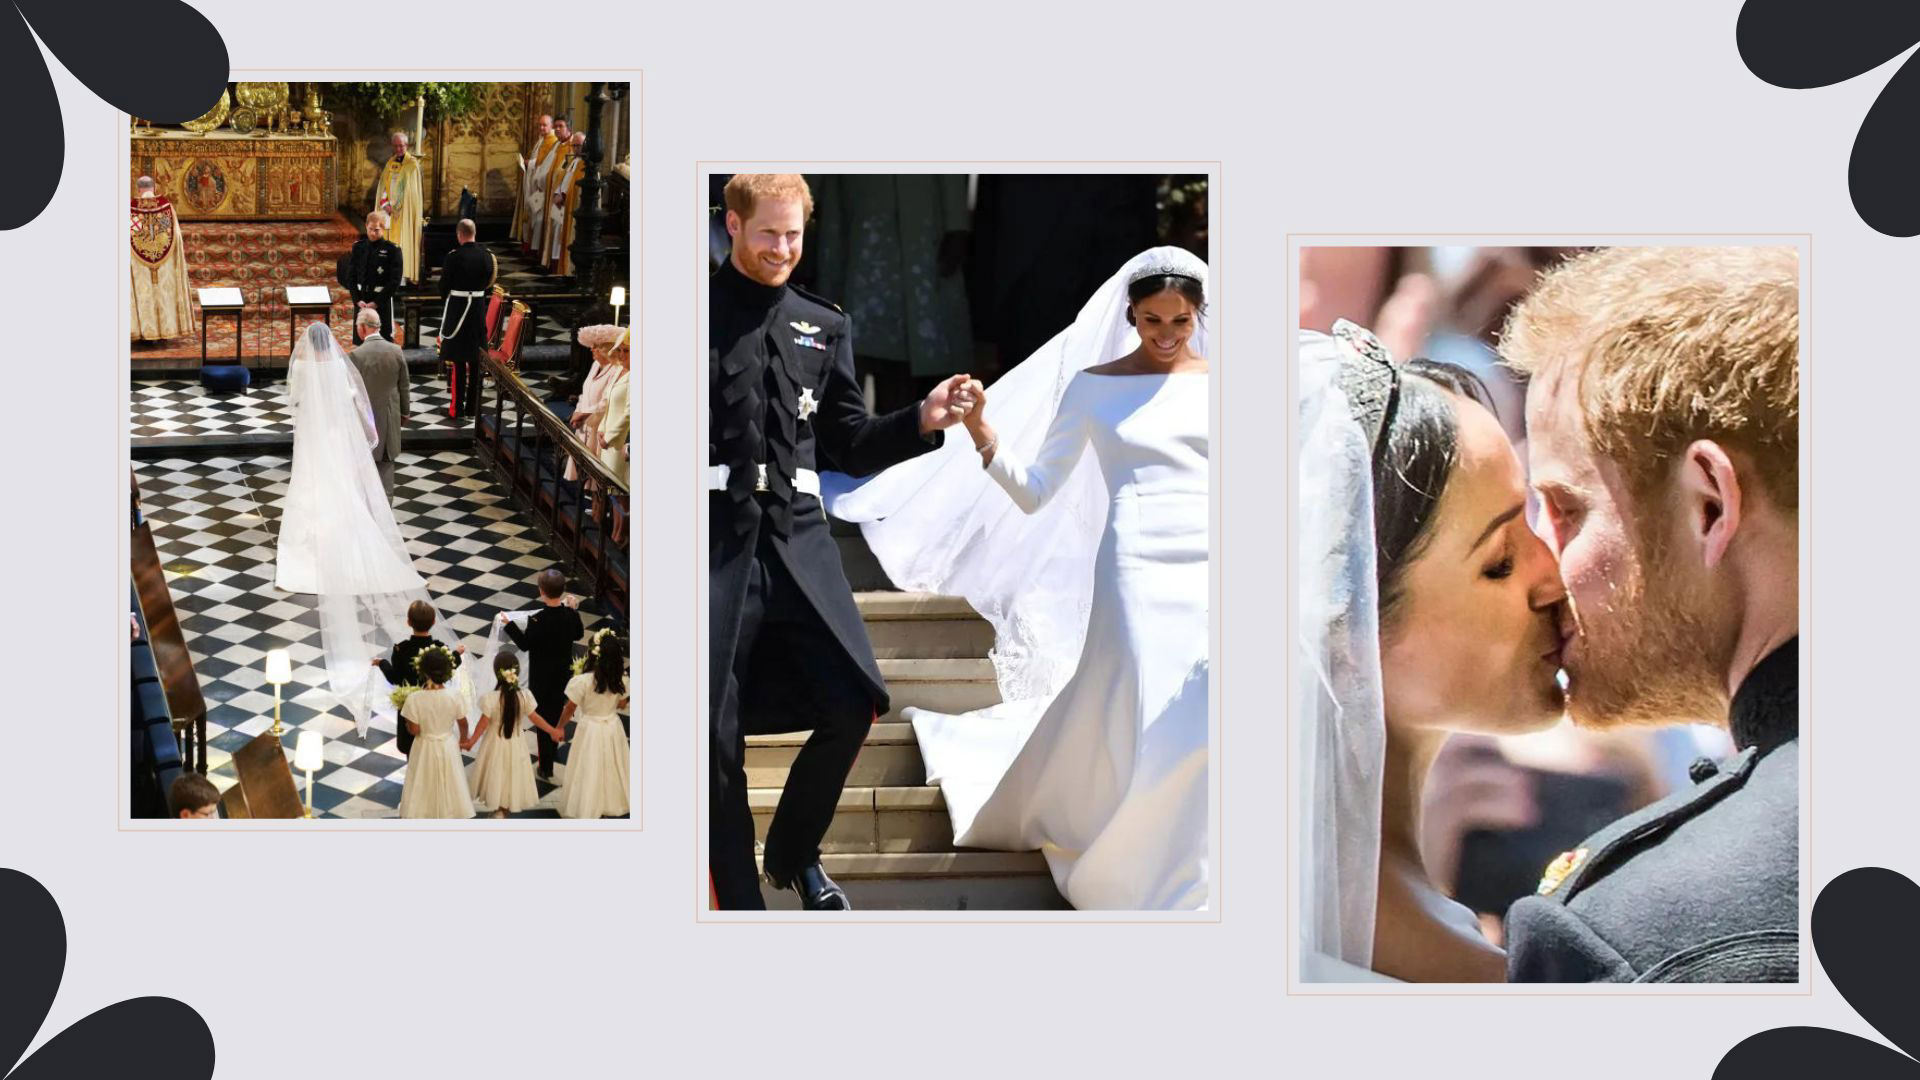 31 sweet facts and pictures from Harry and Meghan's royal wedding